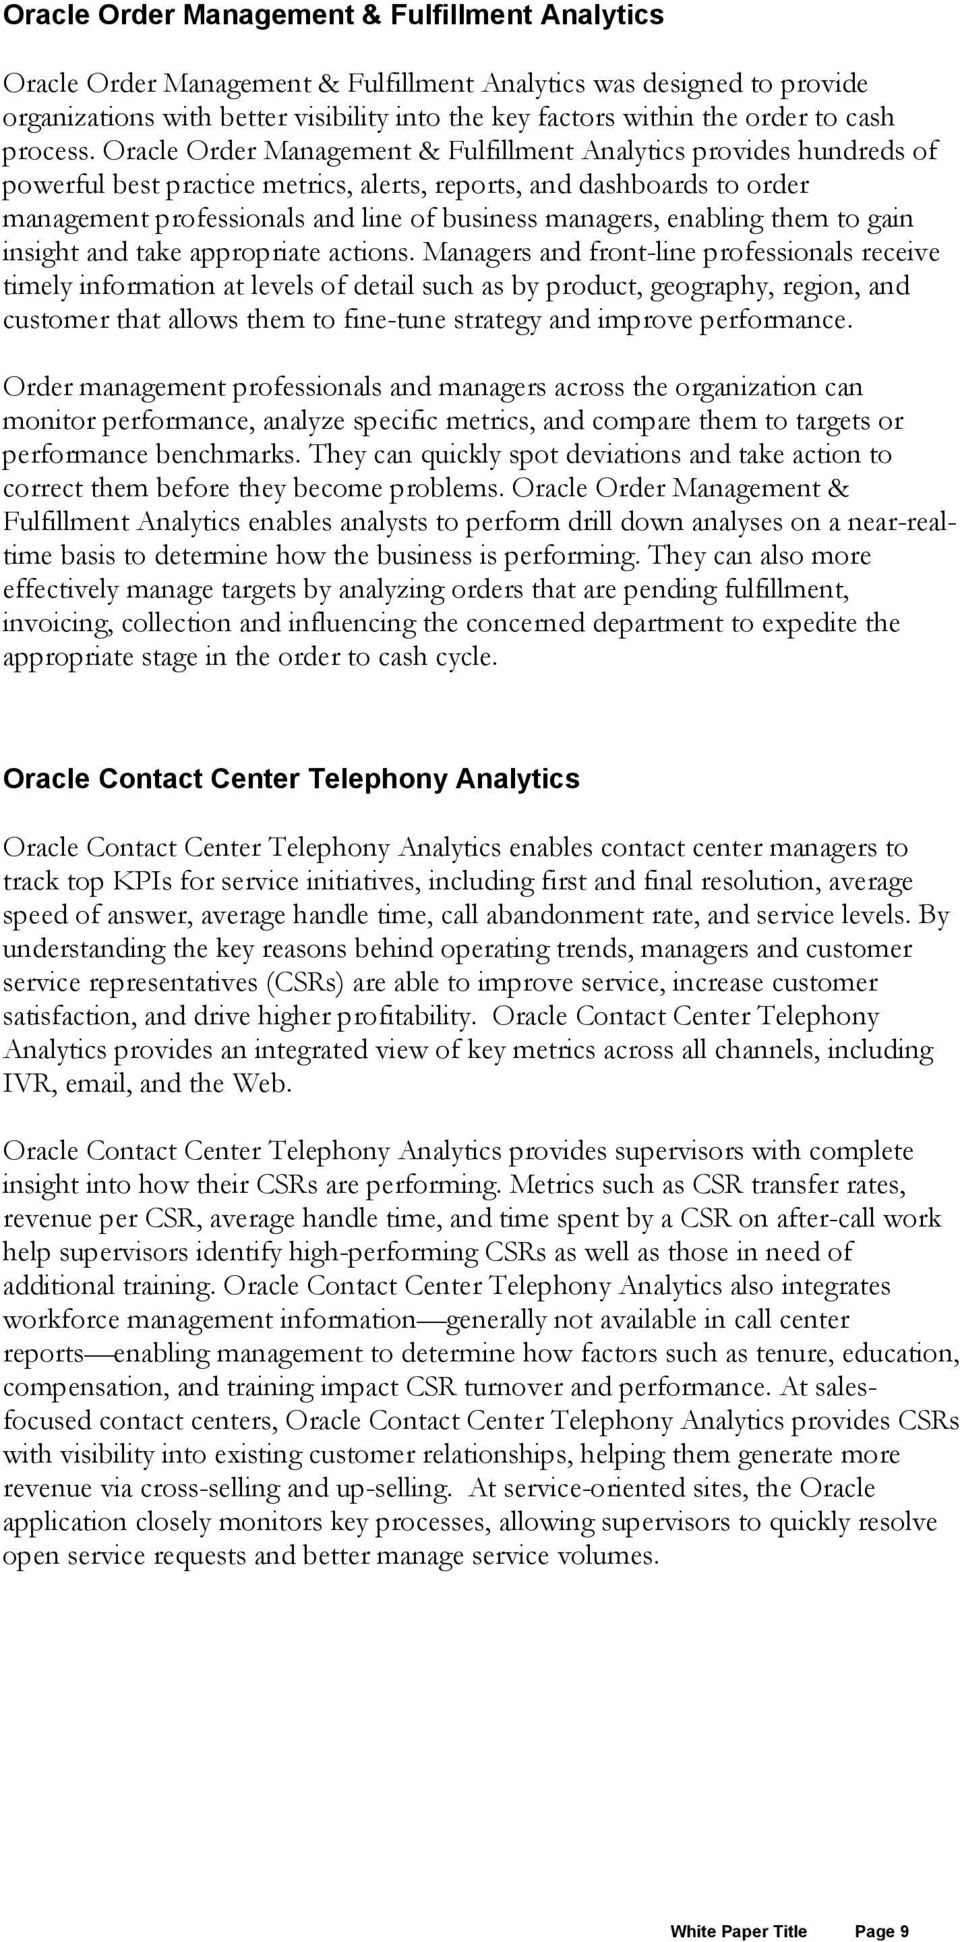 Oracle Order Management & Fulfillment Analytics provides hundreds of powerful best practice metrics, alerts, reports, and dashboards to order management professionals and line of business managers,